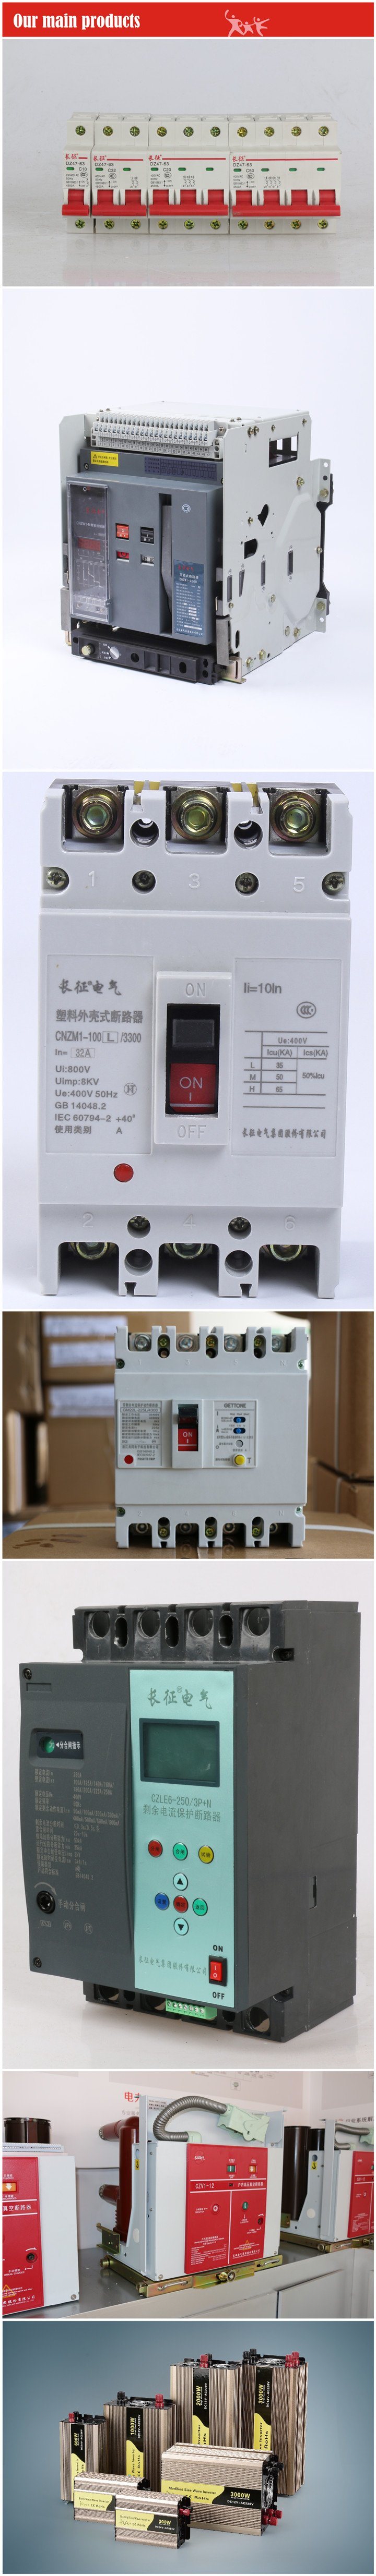 ATS Wats 400A Dual Driver Dual Power Supply Automatic Transfer Switch for Circuit Breaker MCB RCCB